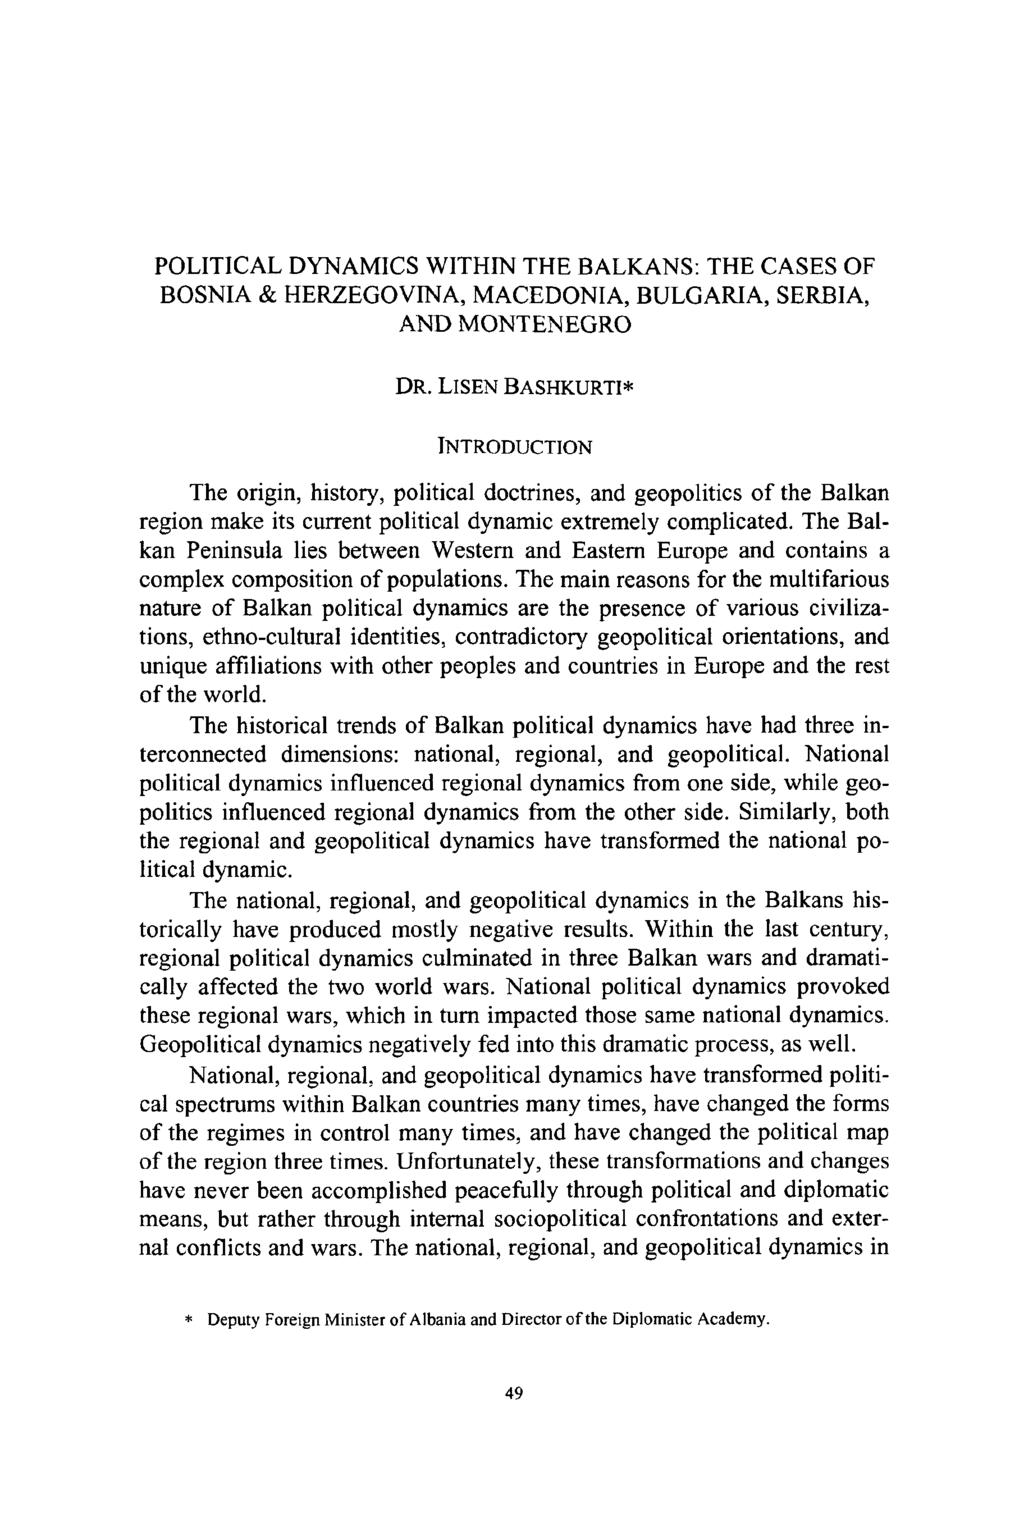 POLITICAL DYNAMICS WITHIN THE BALKANS: THE CASES OF BOSNIA & HERZEGOVINA, MACEDONIA, BULGARIA, SERBIA, AND MONTENEGRO DR.